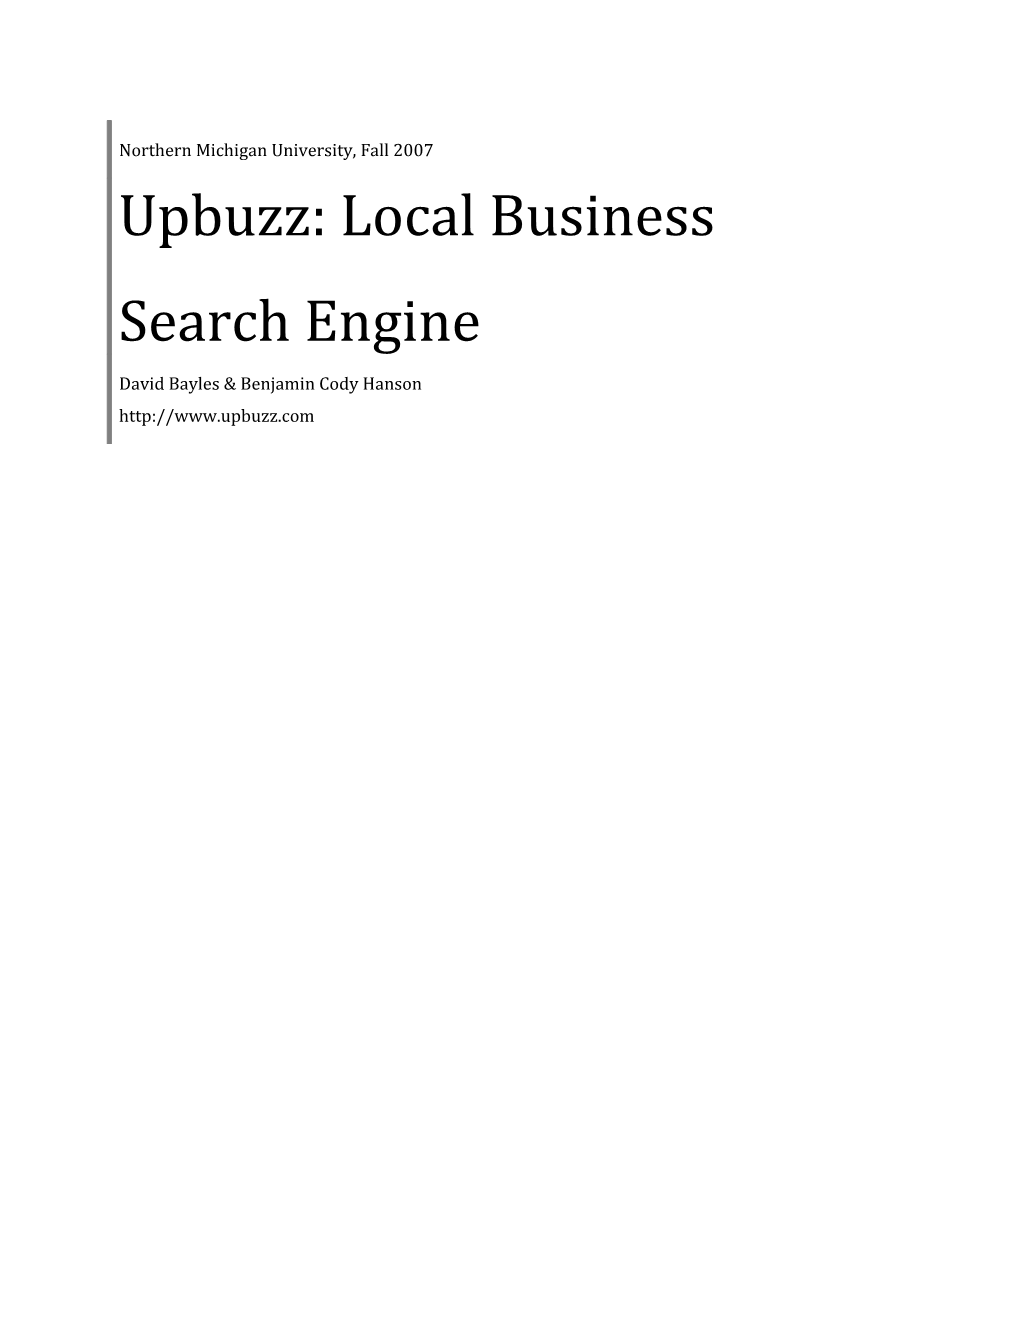 Upbuzz: Local Business Search Engine